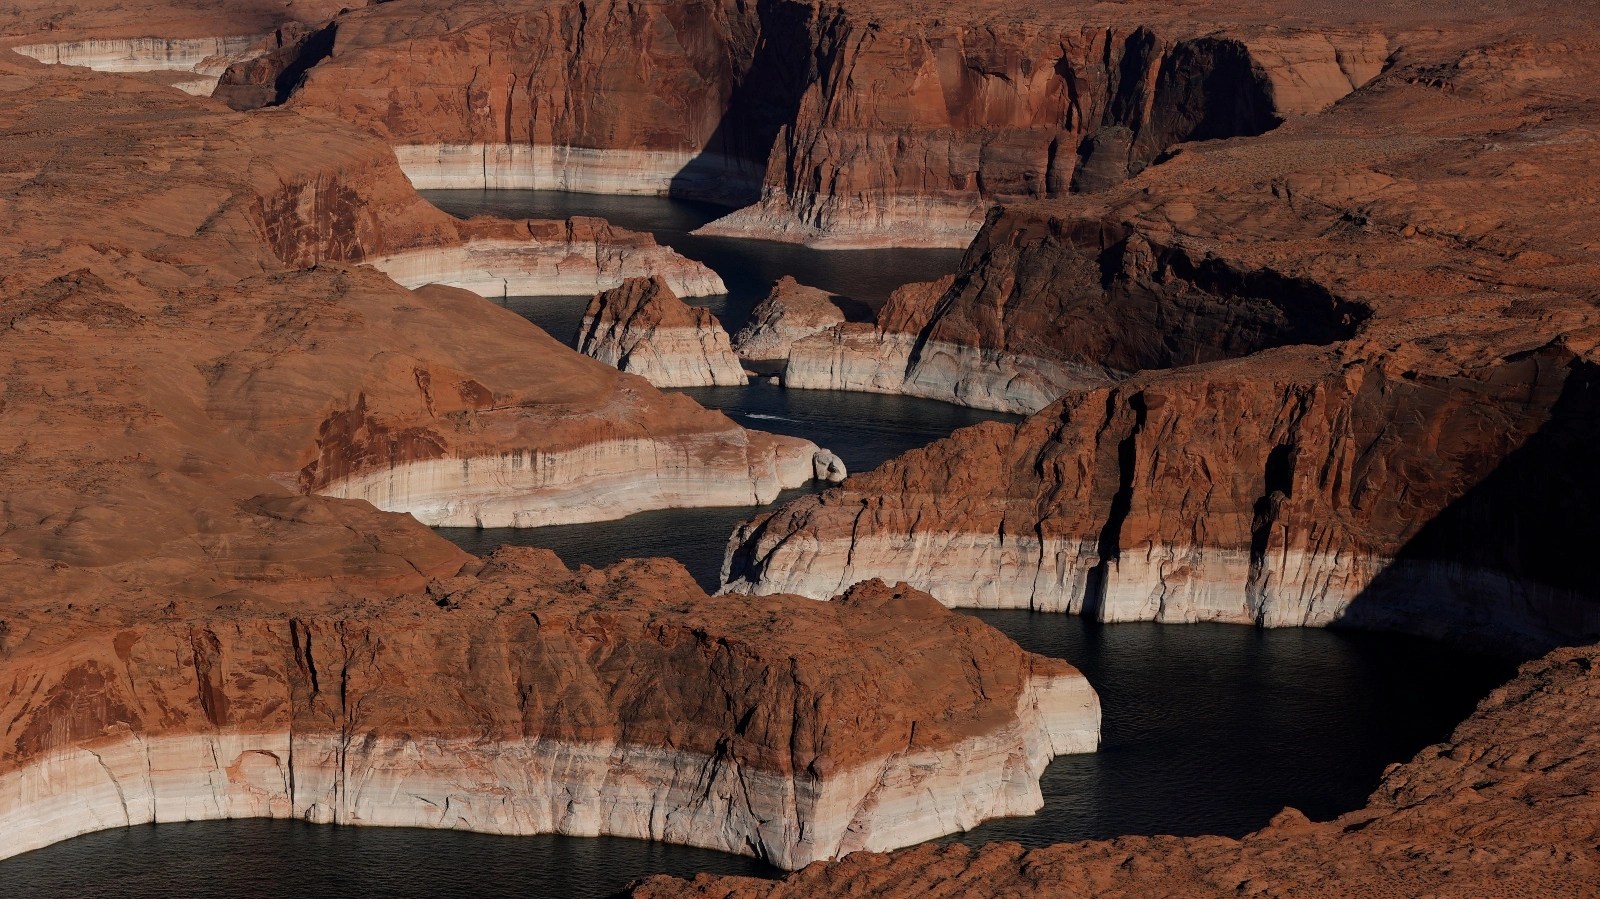 Aerial view of bleached sections of rock surrounding Lake Powell, showing the amount the water level has dropped due to climate change